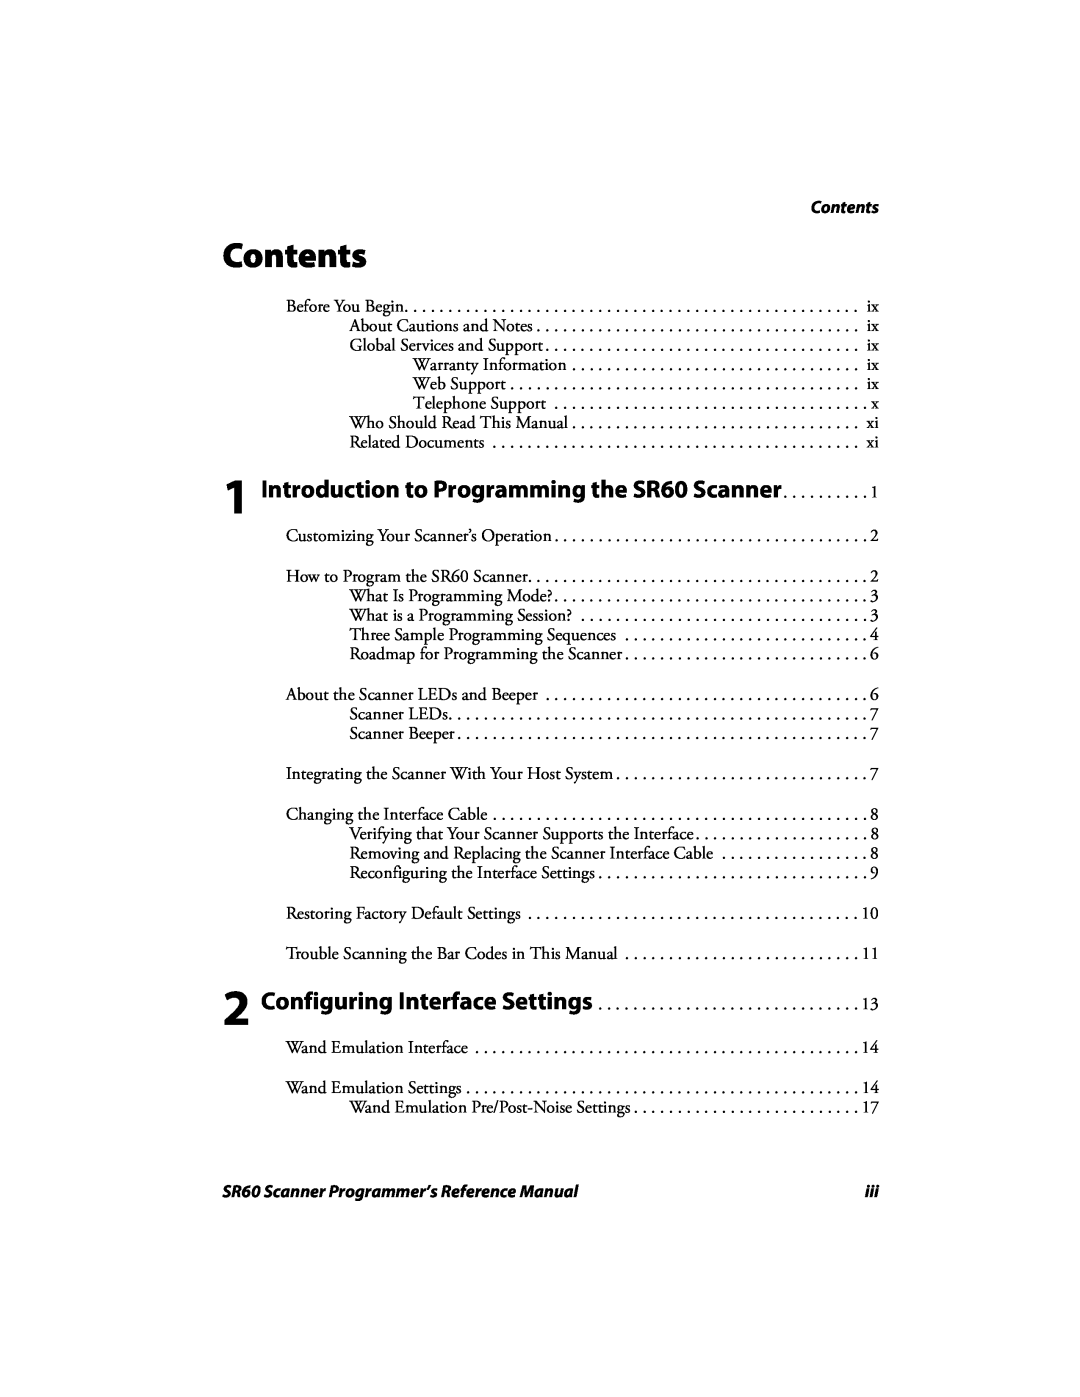 Intermec manual Introduction to Programming the SR60 Scanner, Contents, SR60 Scanner Programmer’s Reference Manual 